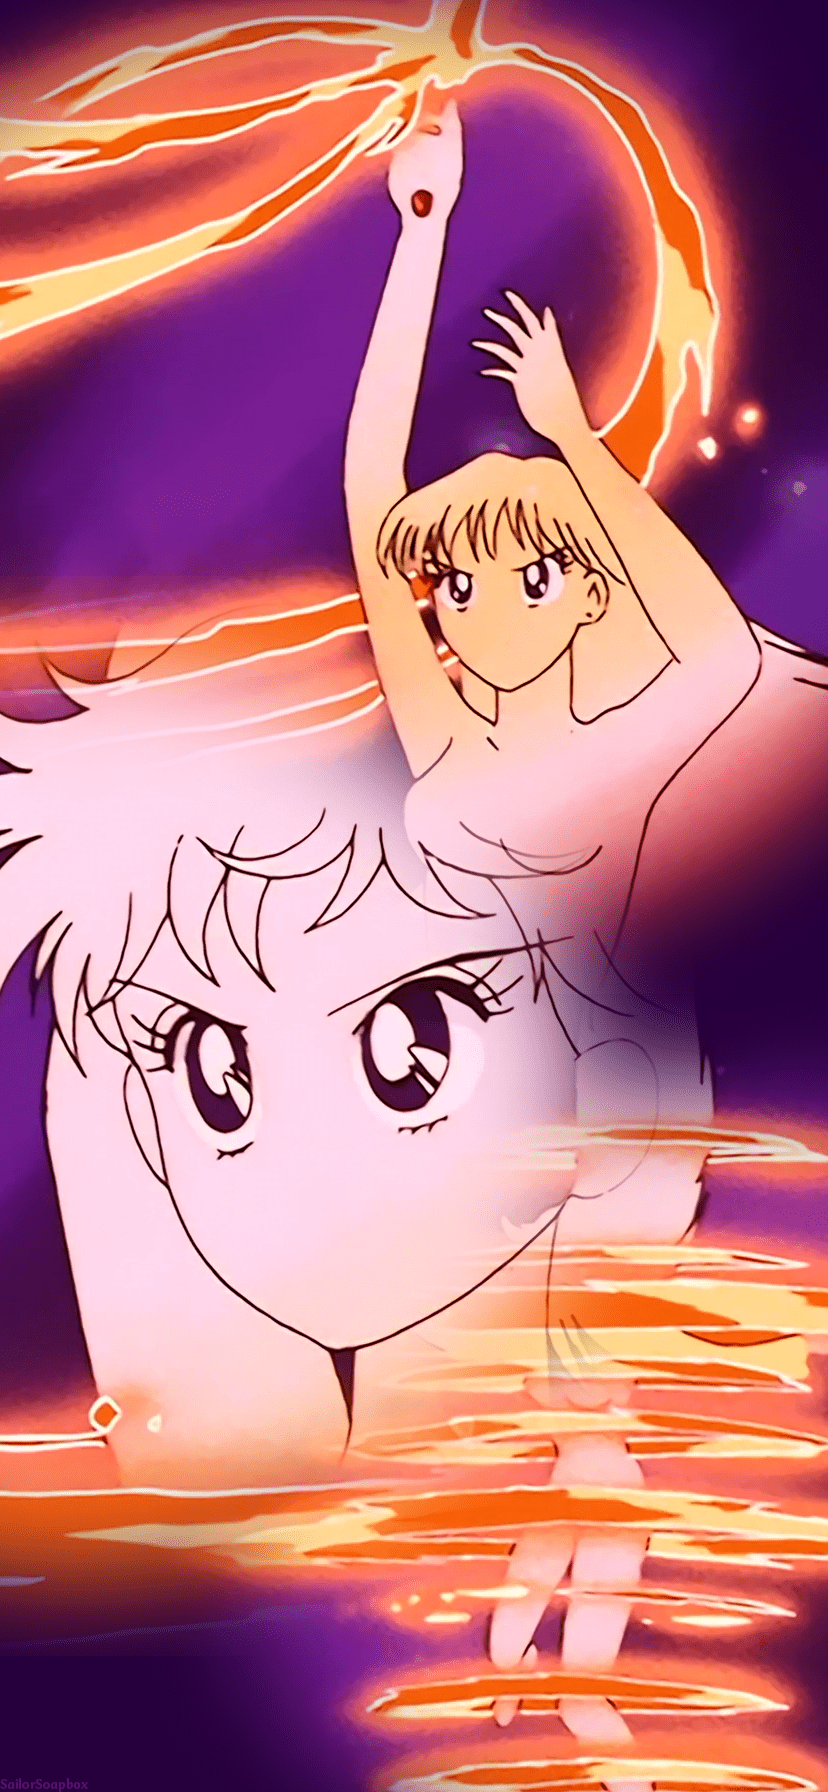 Usagi looks up at Minako, who is flying through the air with a fireball between her hands. - Sailor Mars